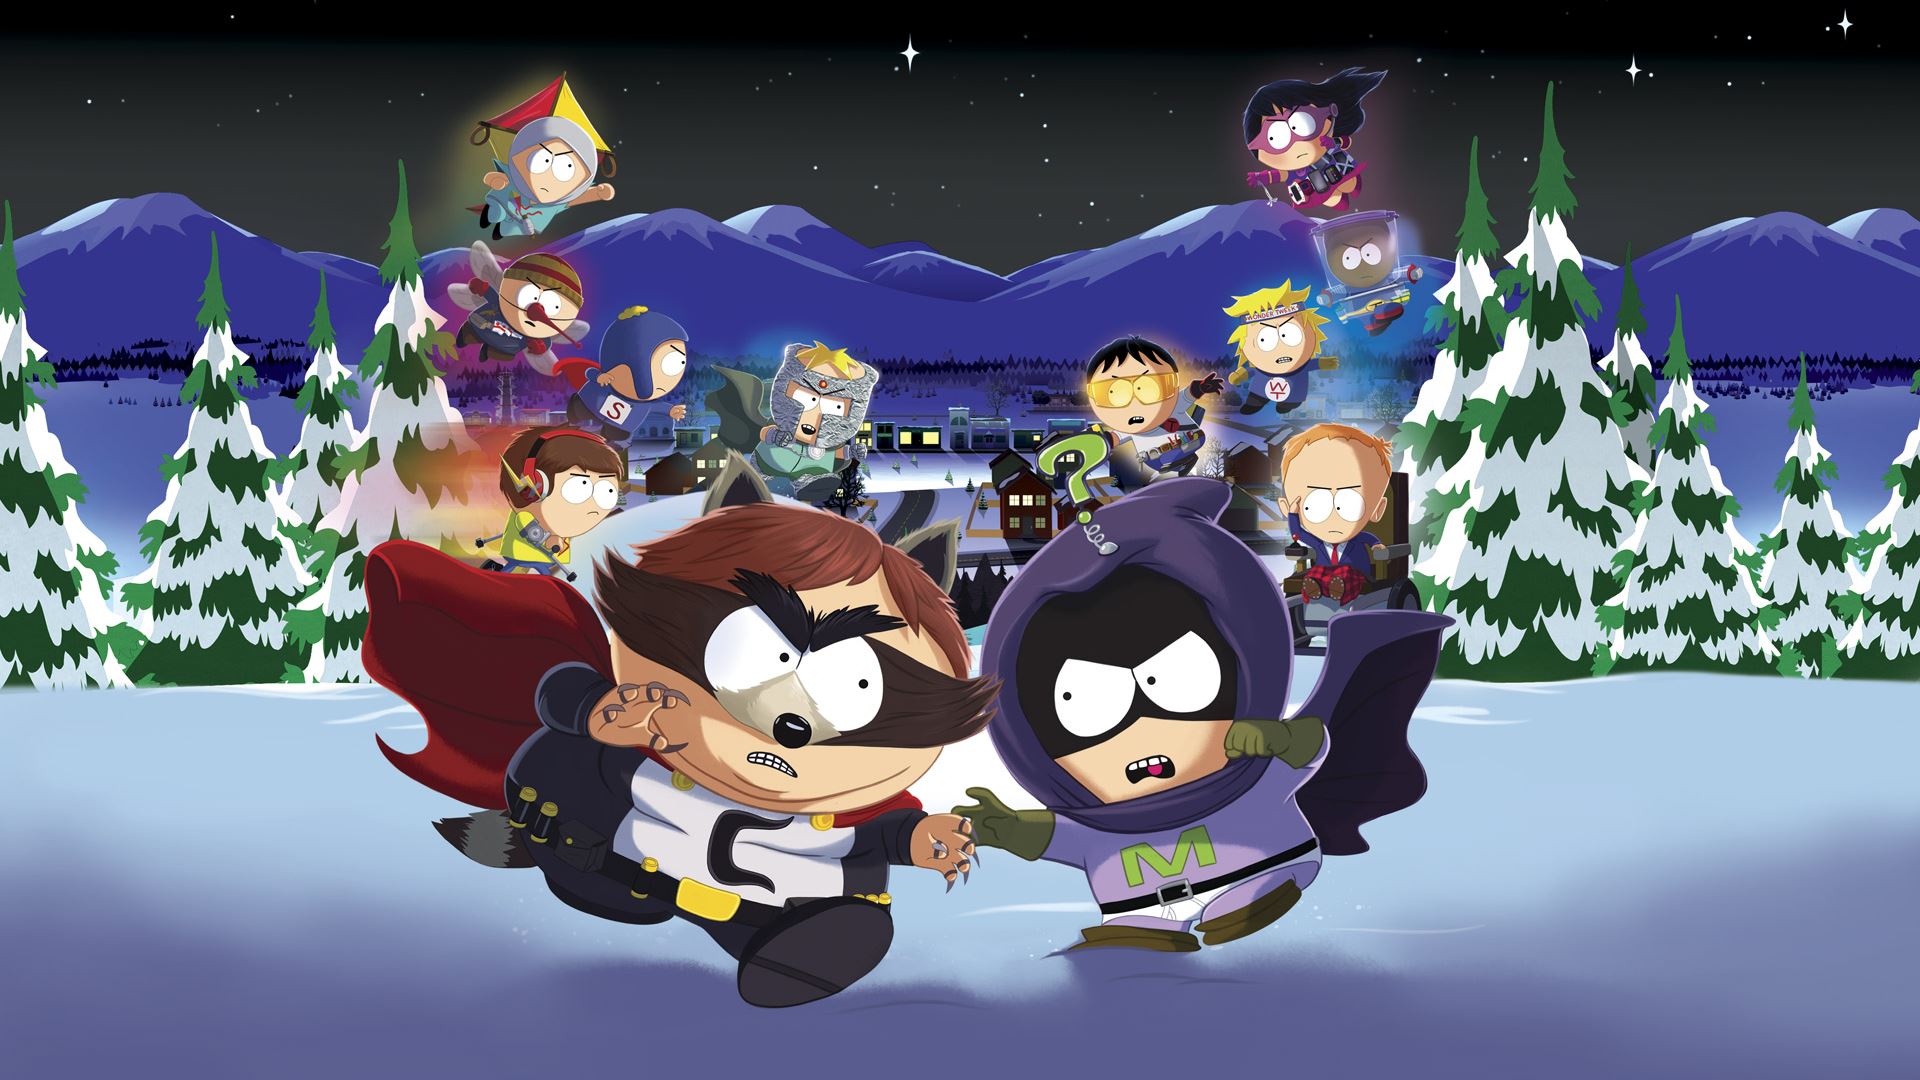 South Park: The Fractured but Whole "Превью"